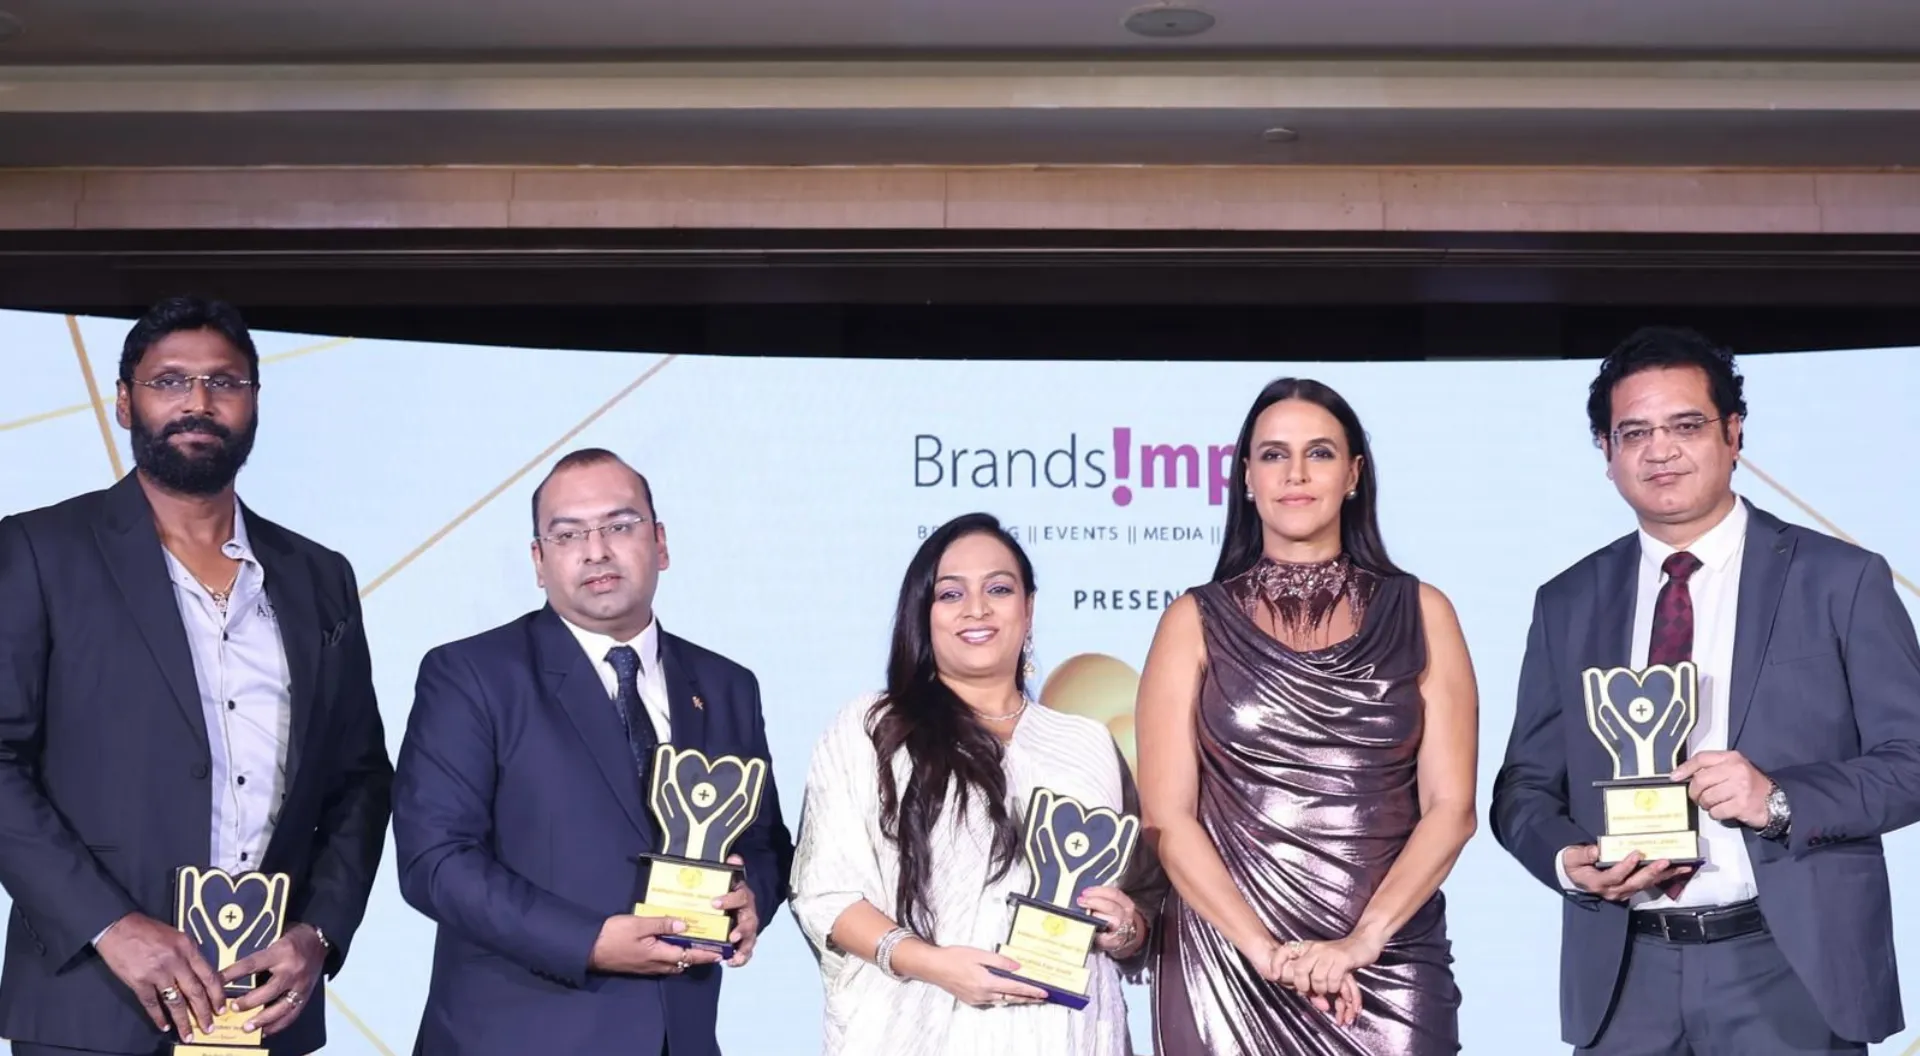 Awards Achivers with Neha Dhupia at Brands impact.